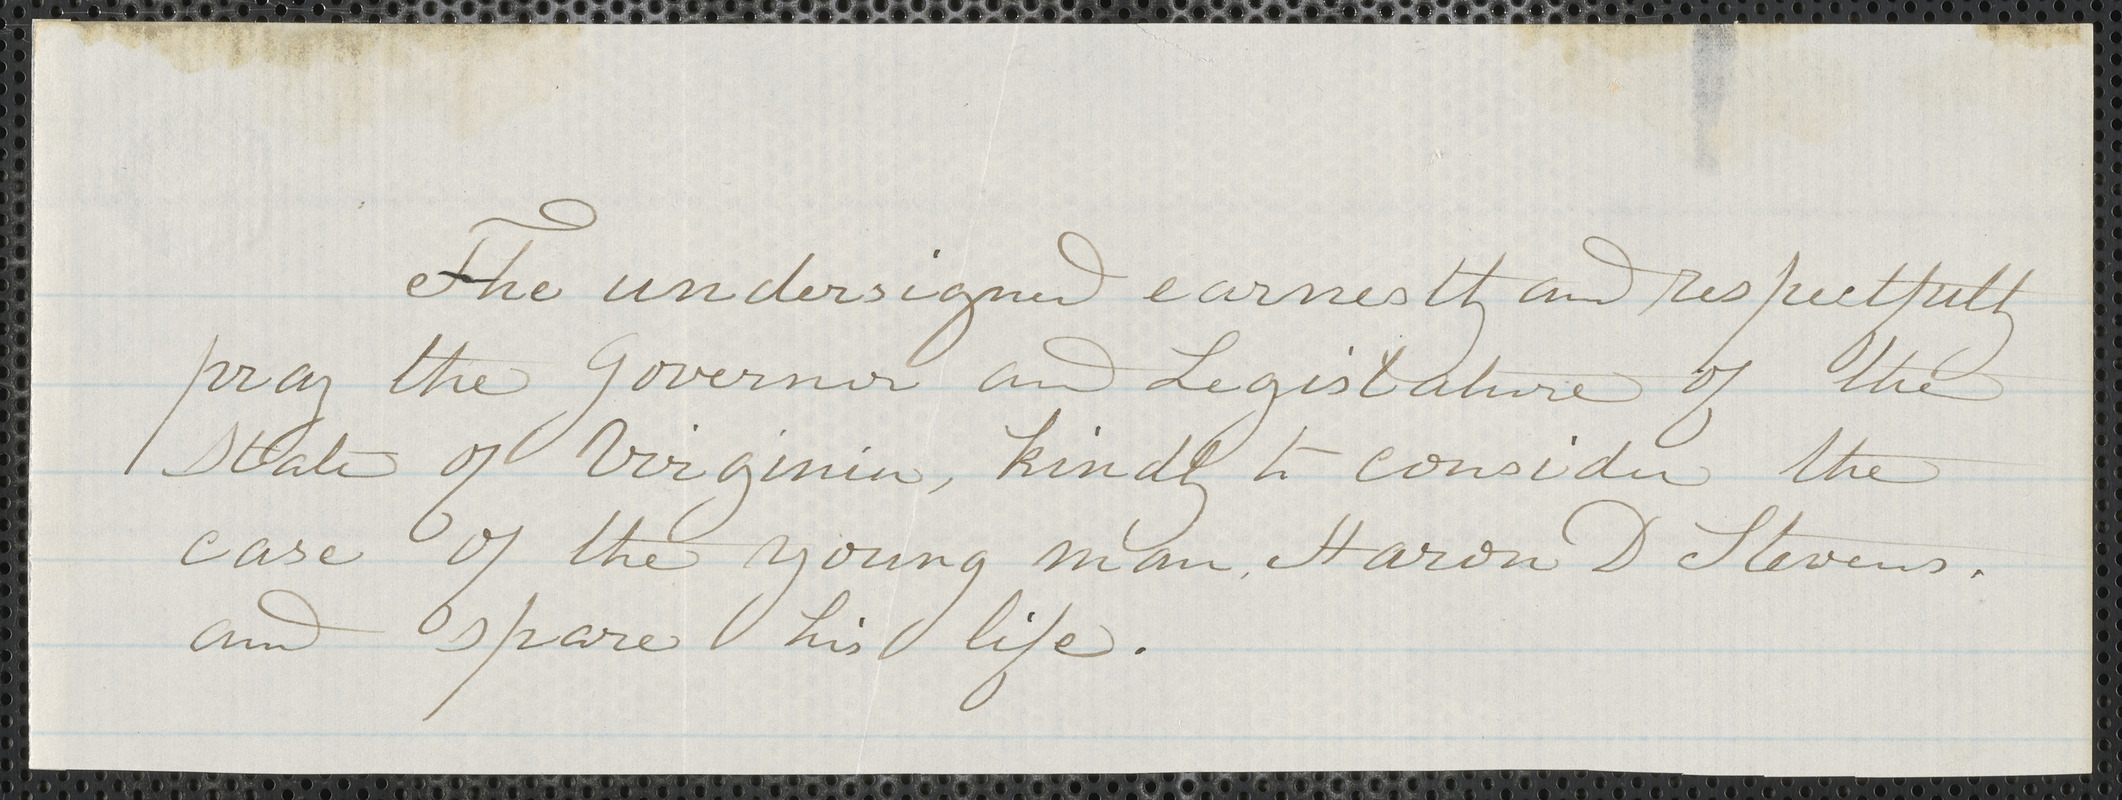 Rebecca Buffum Spring autograph document to the Governor and Legislature of the State of Virginia, 10 February [1860]